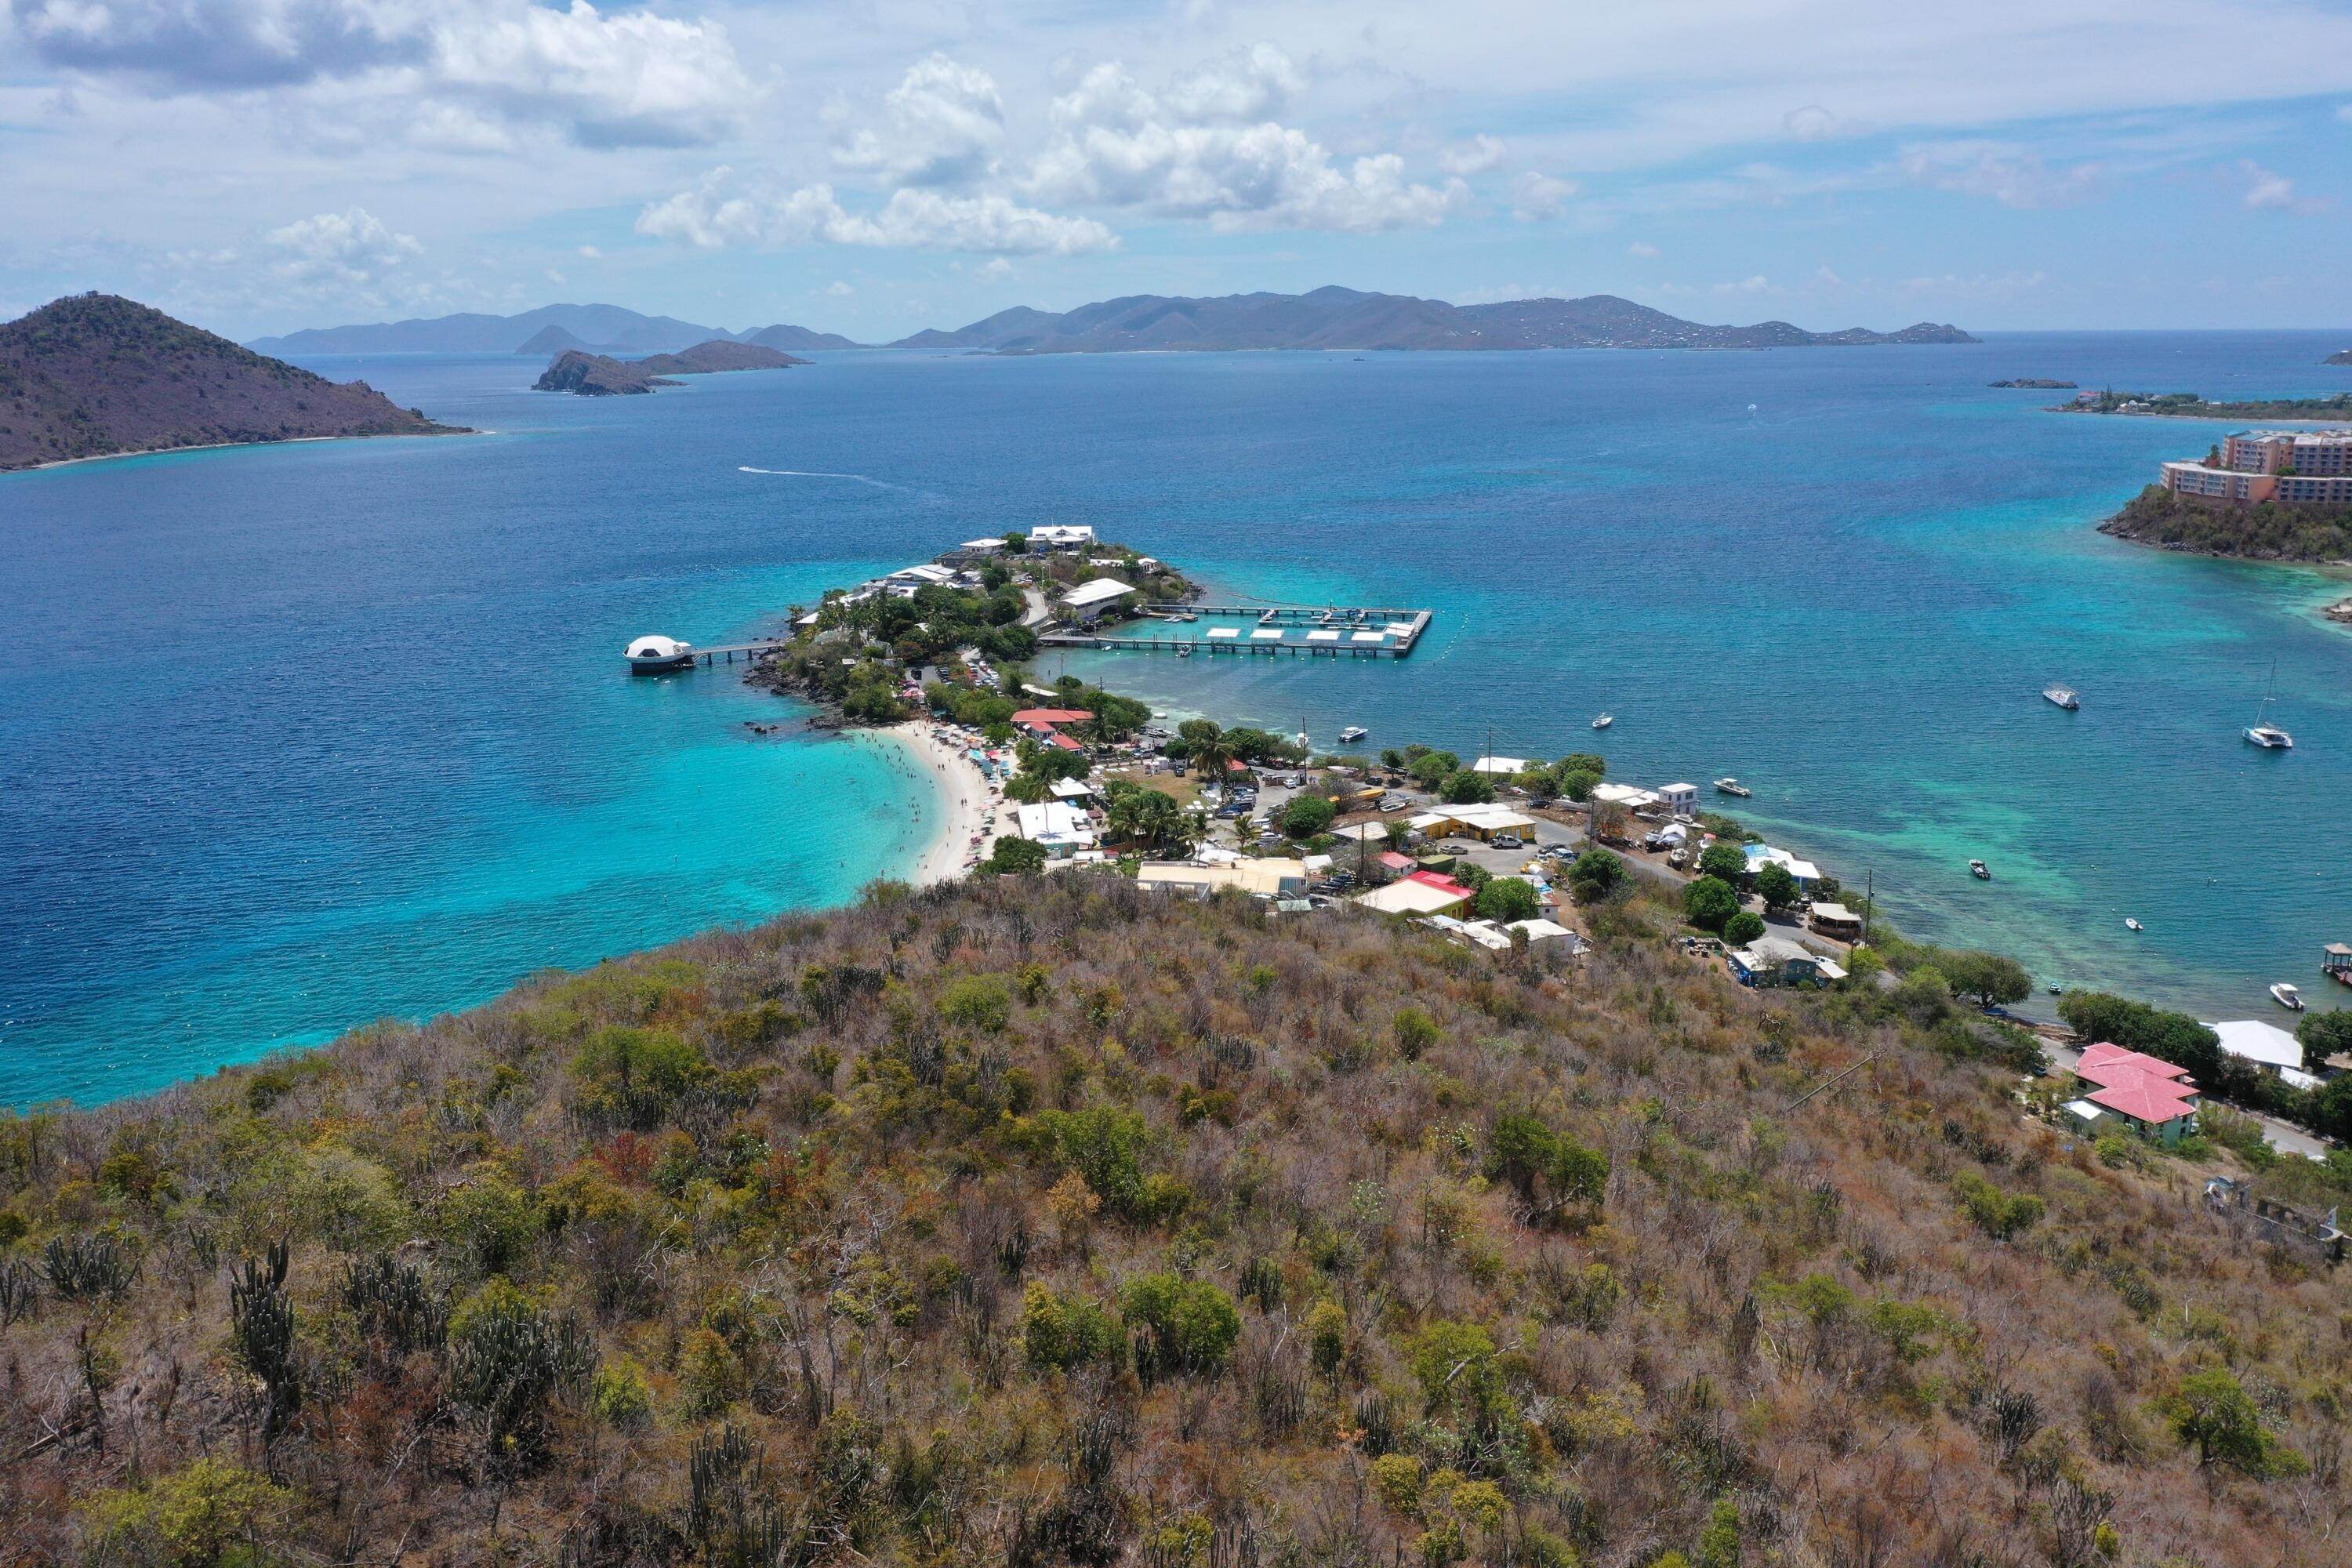 Land for Sale at B-8 Coki Point EE St Thomas, Virgin Islands 00802 United States Virgin Islands